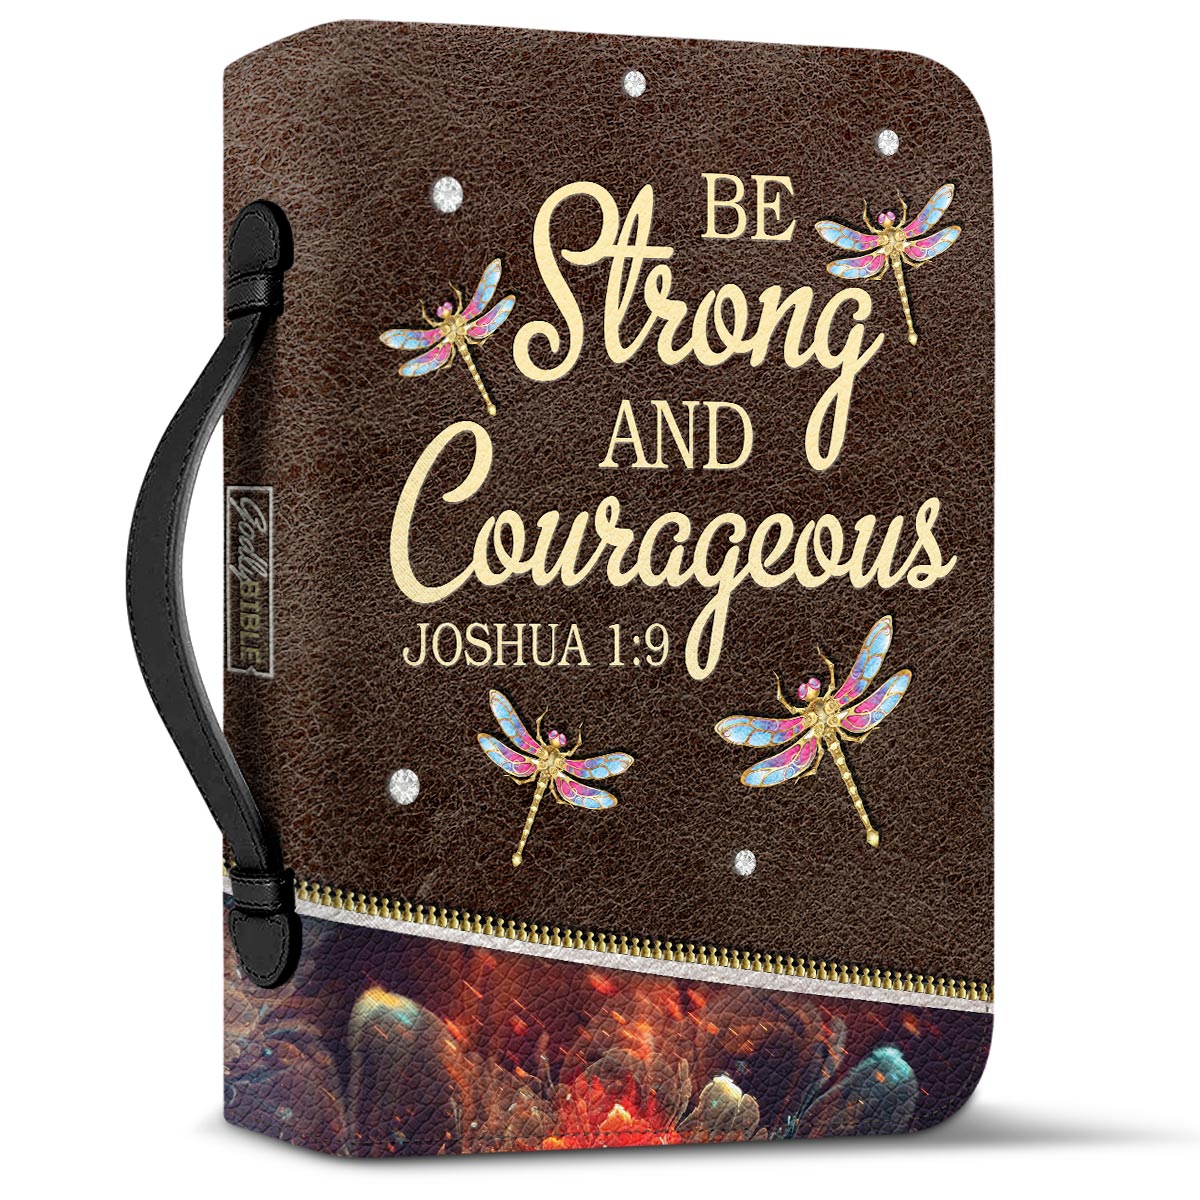 Be Strong And Courageous Dragonfly Joshua 1 9 Personalized Bible Cover - Gift Bible Cover for Christians